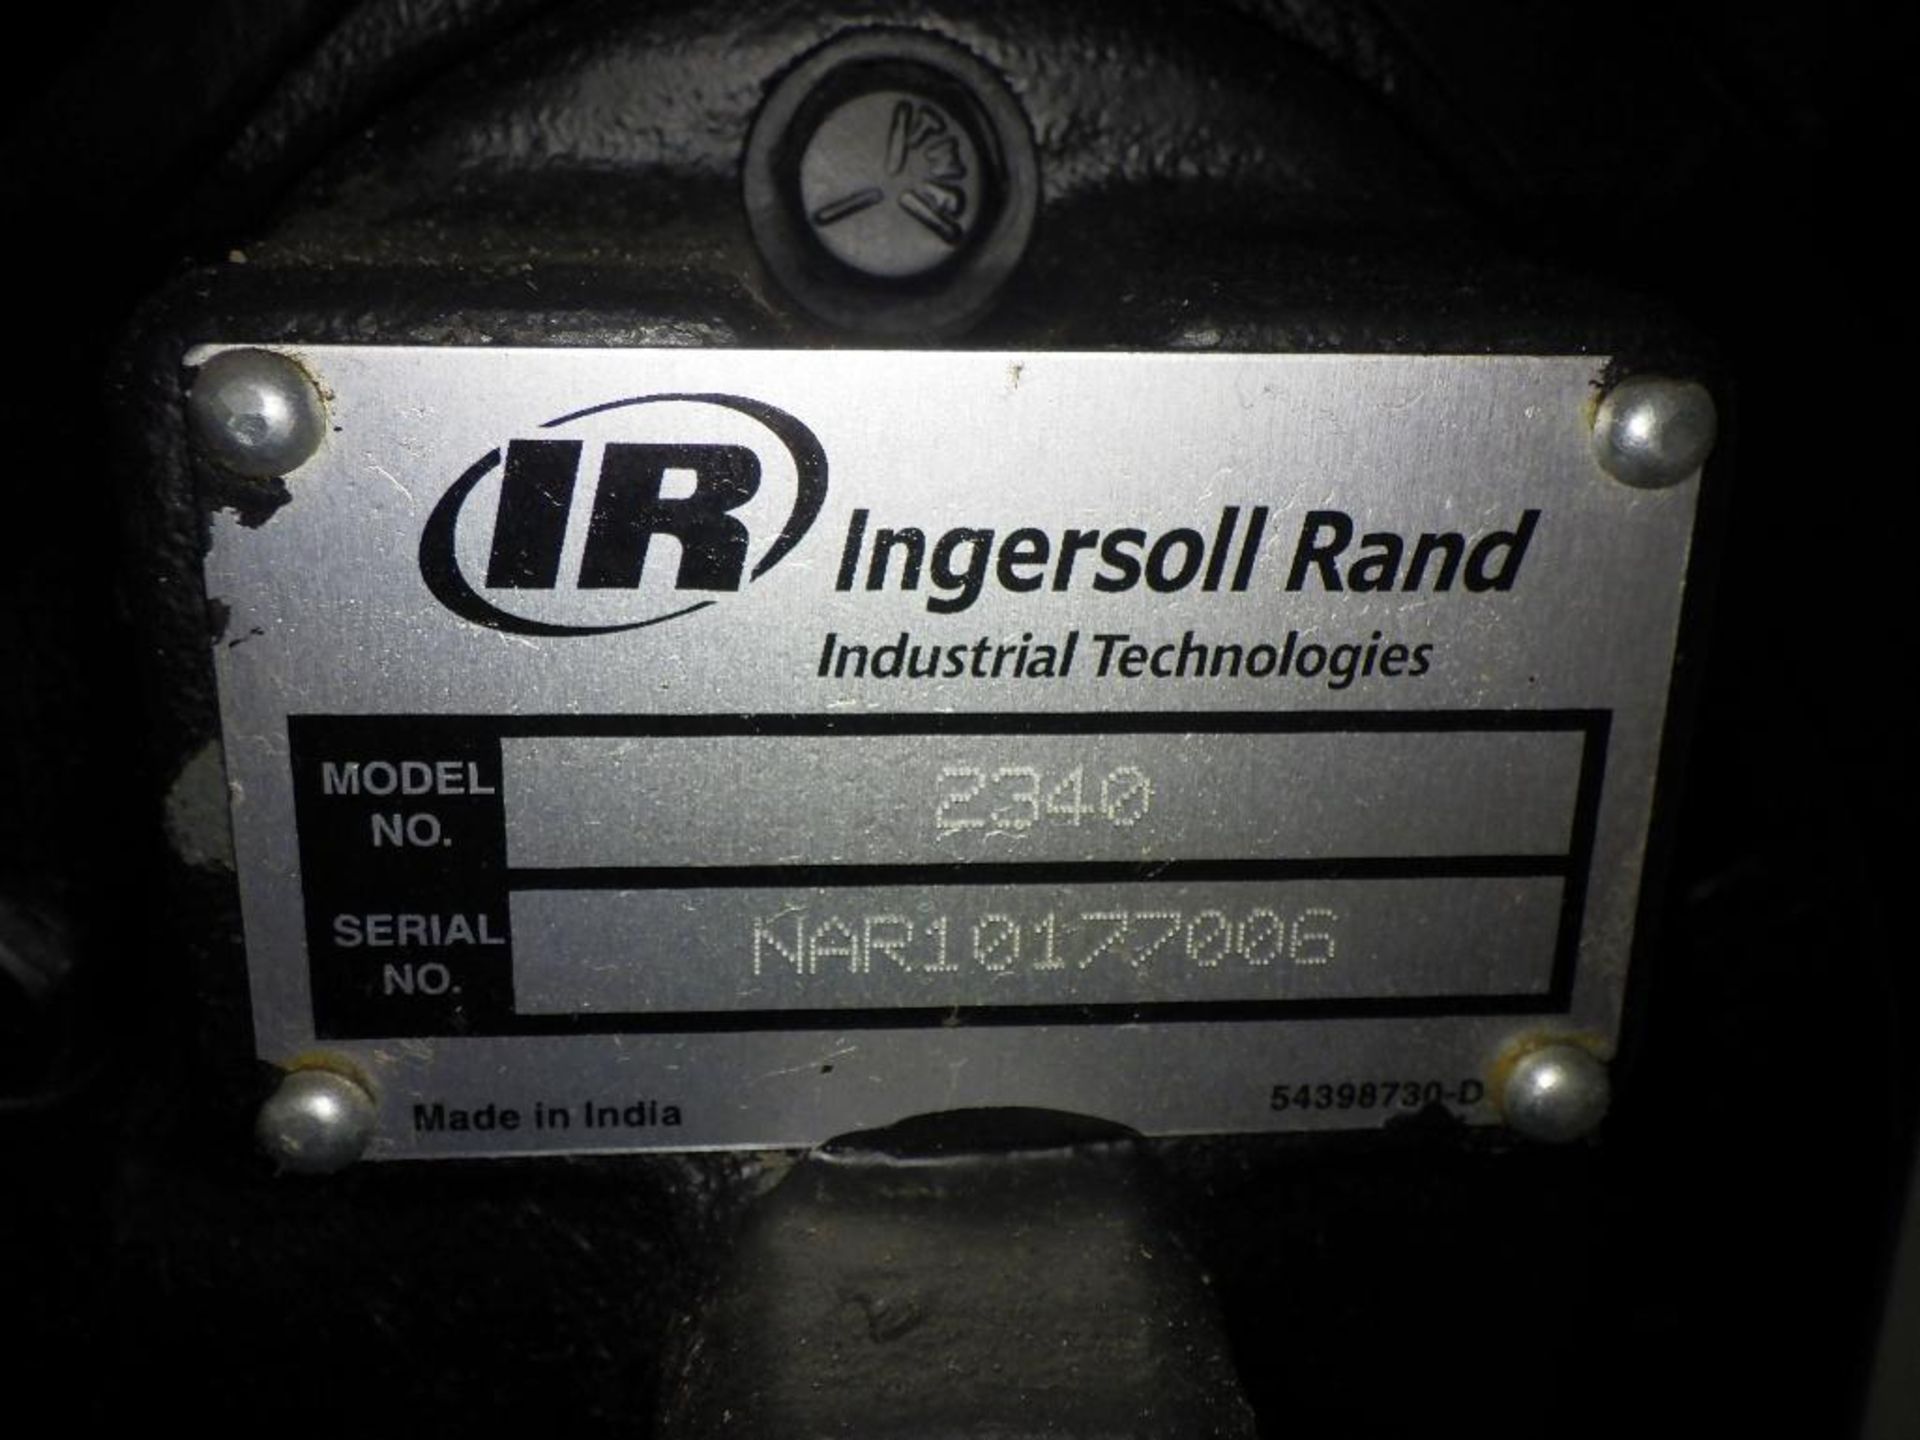 Ingersoll rand air compressor with dryer - Image 6 of 12